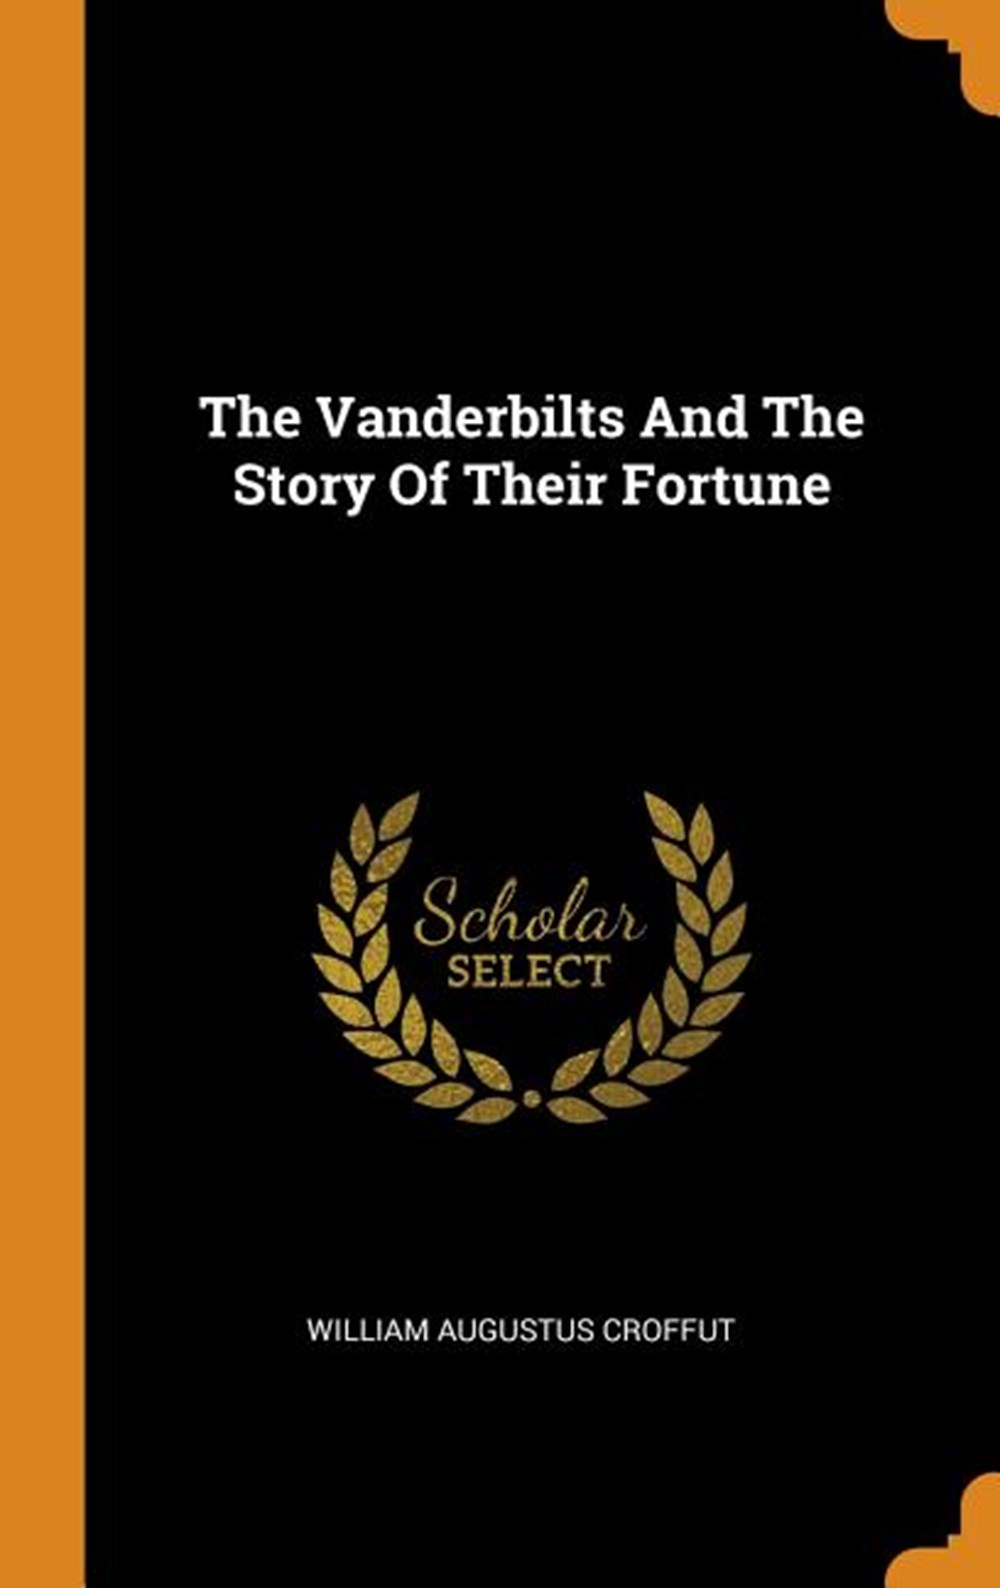 Vanderbilts and the Story of Their Fortune